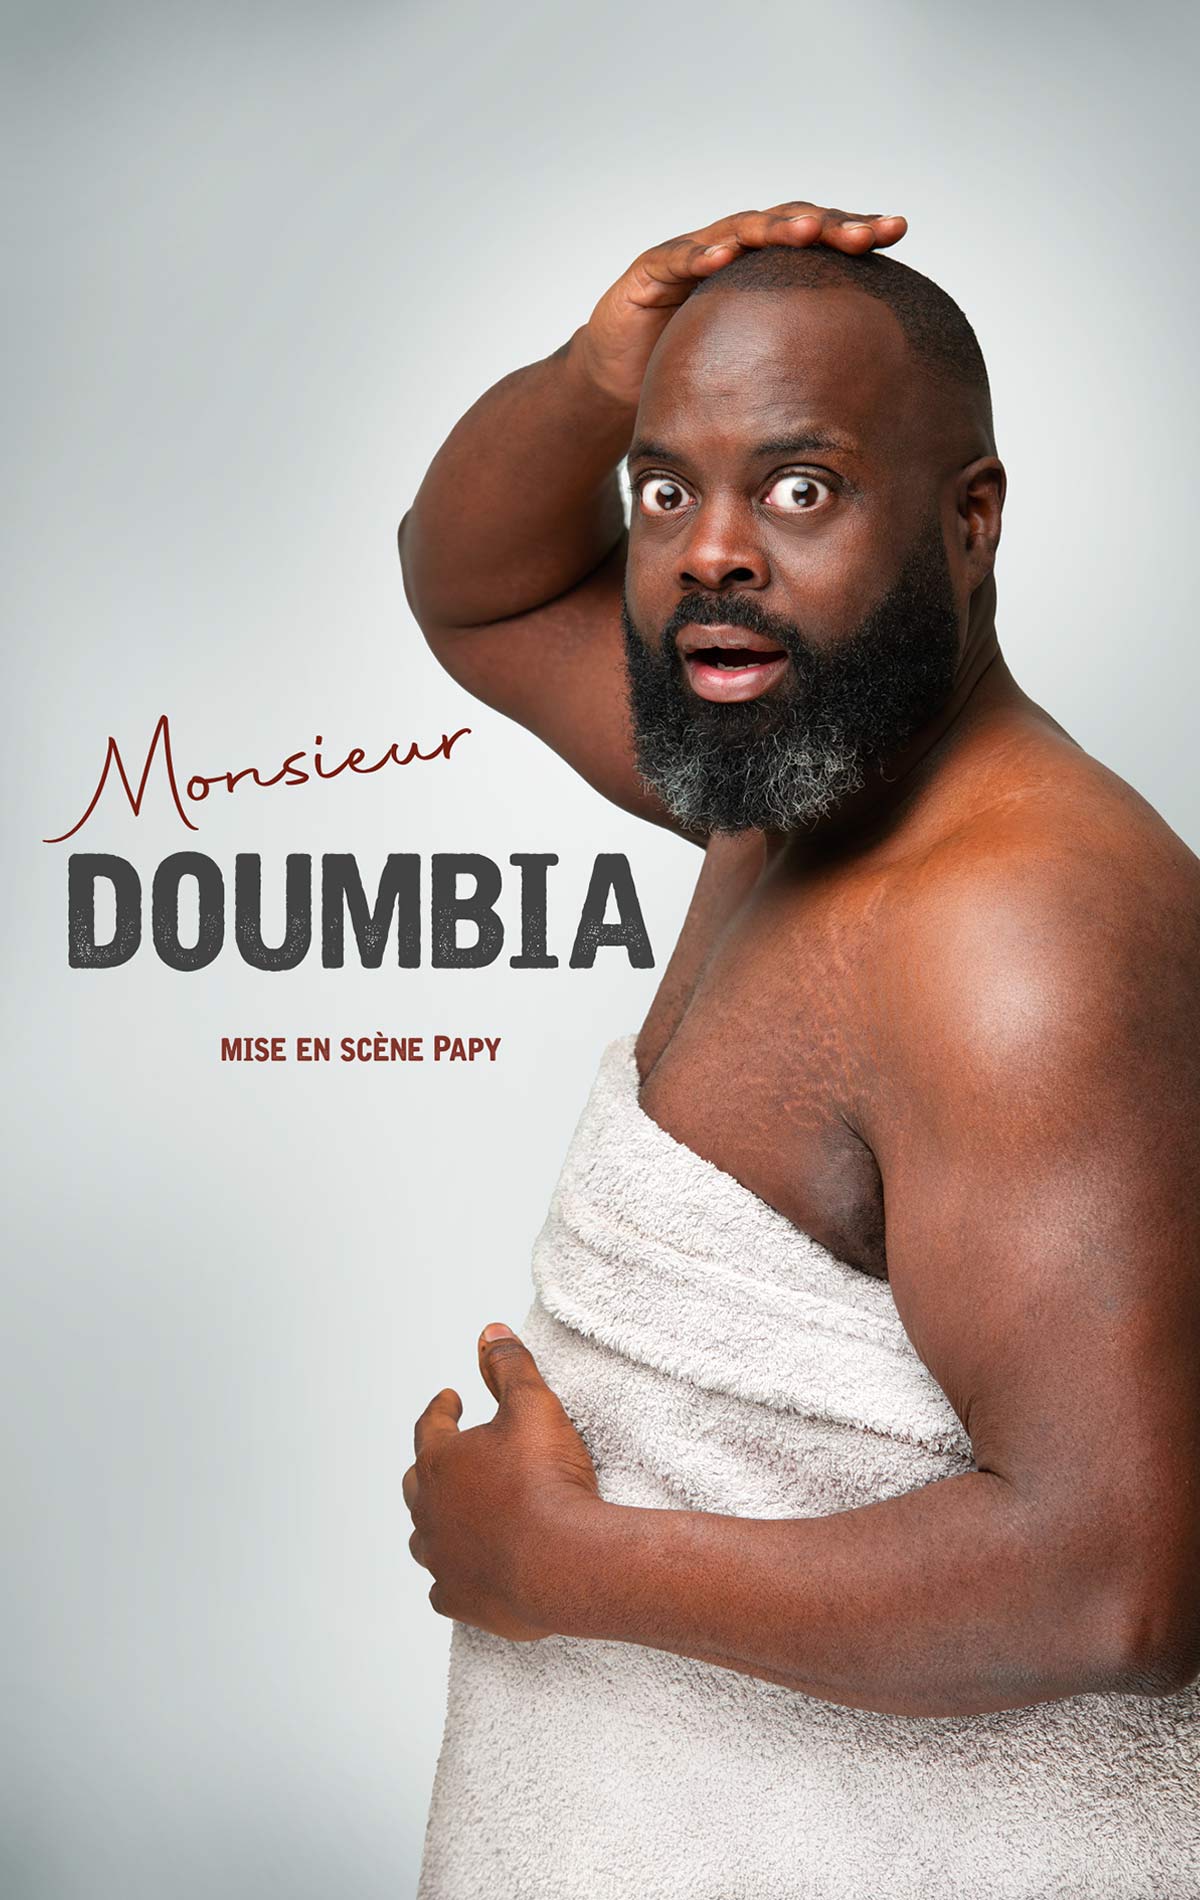 Issa Doumbia at Casino Barriere Toulouse Tickets